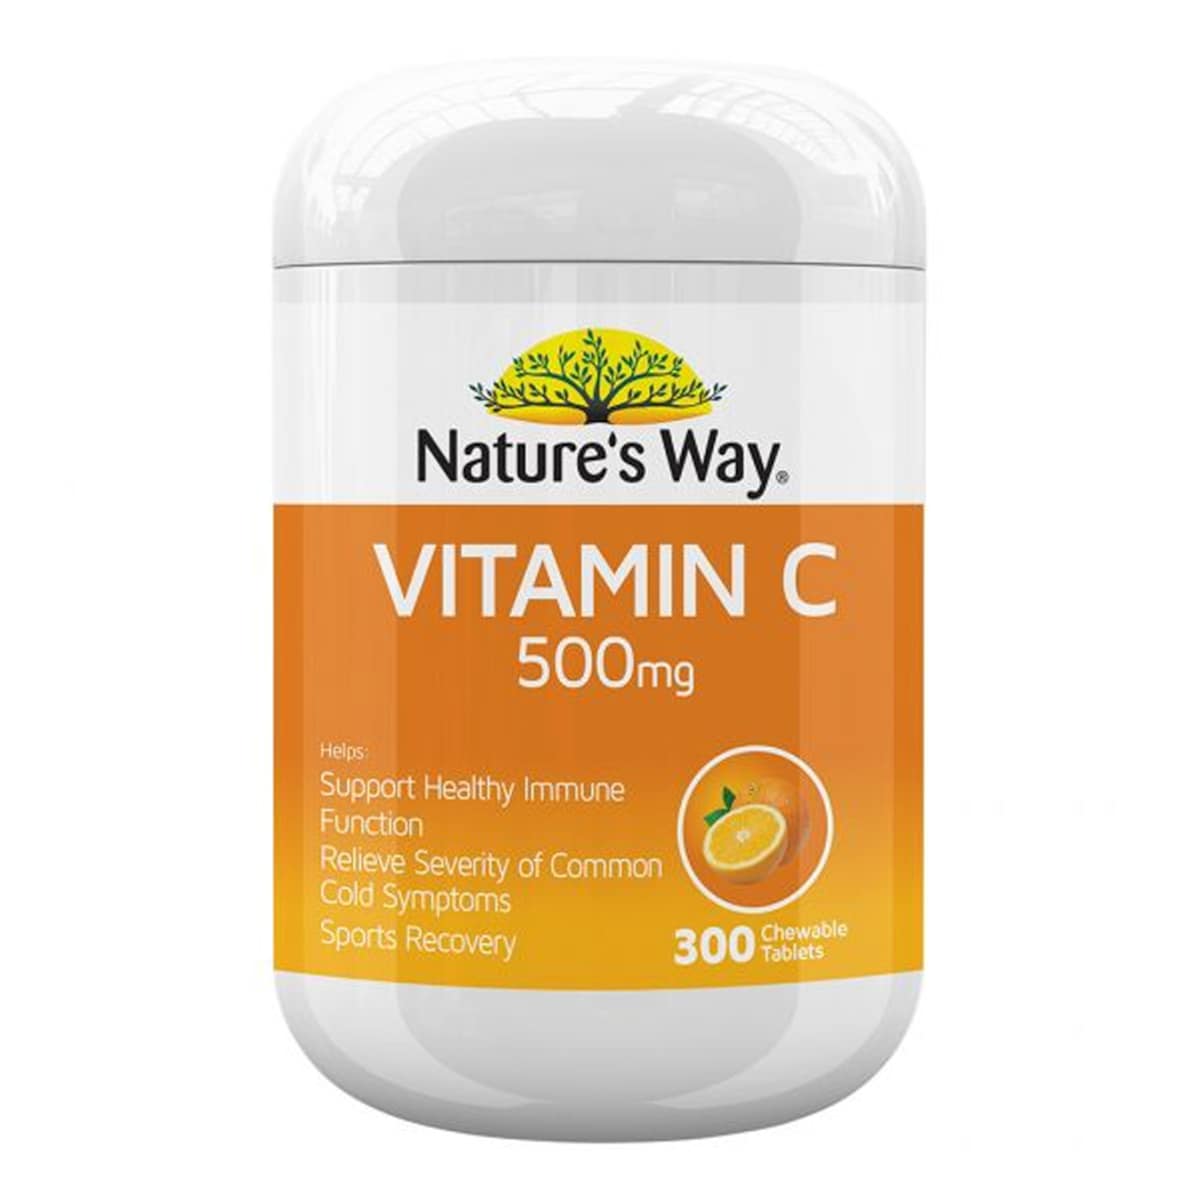 Natures Way Vitamin C 500mg 300 Chewable Tablets